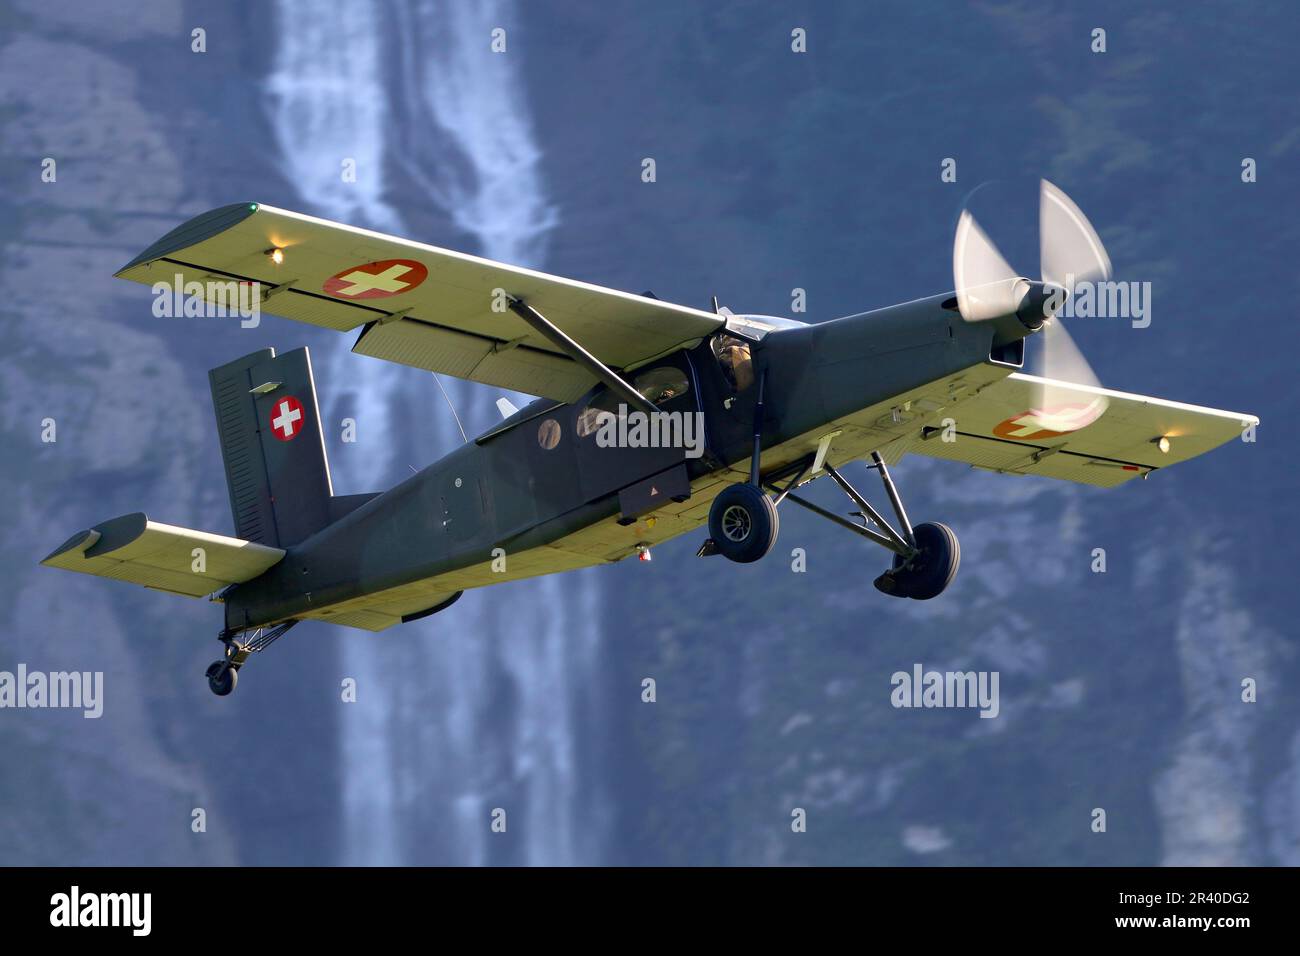 A PC-6/B2-H2 Turbo Porter transport aircraft of Swiss Air Force taking off. Stock Photo